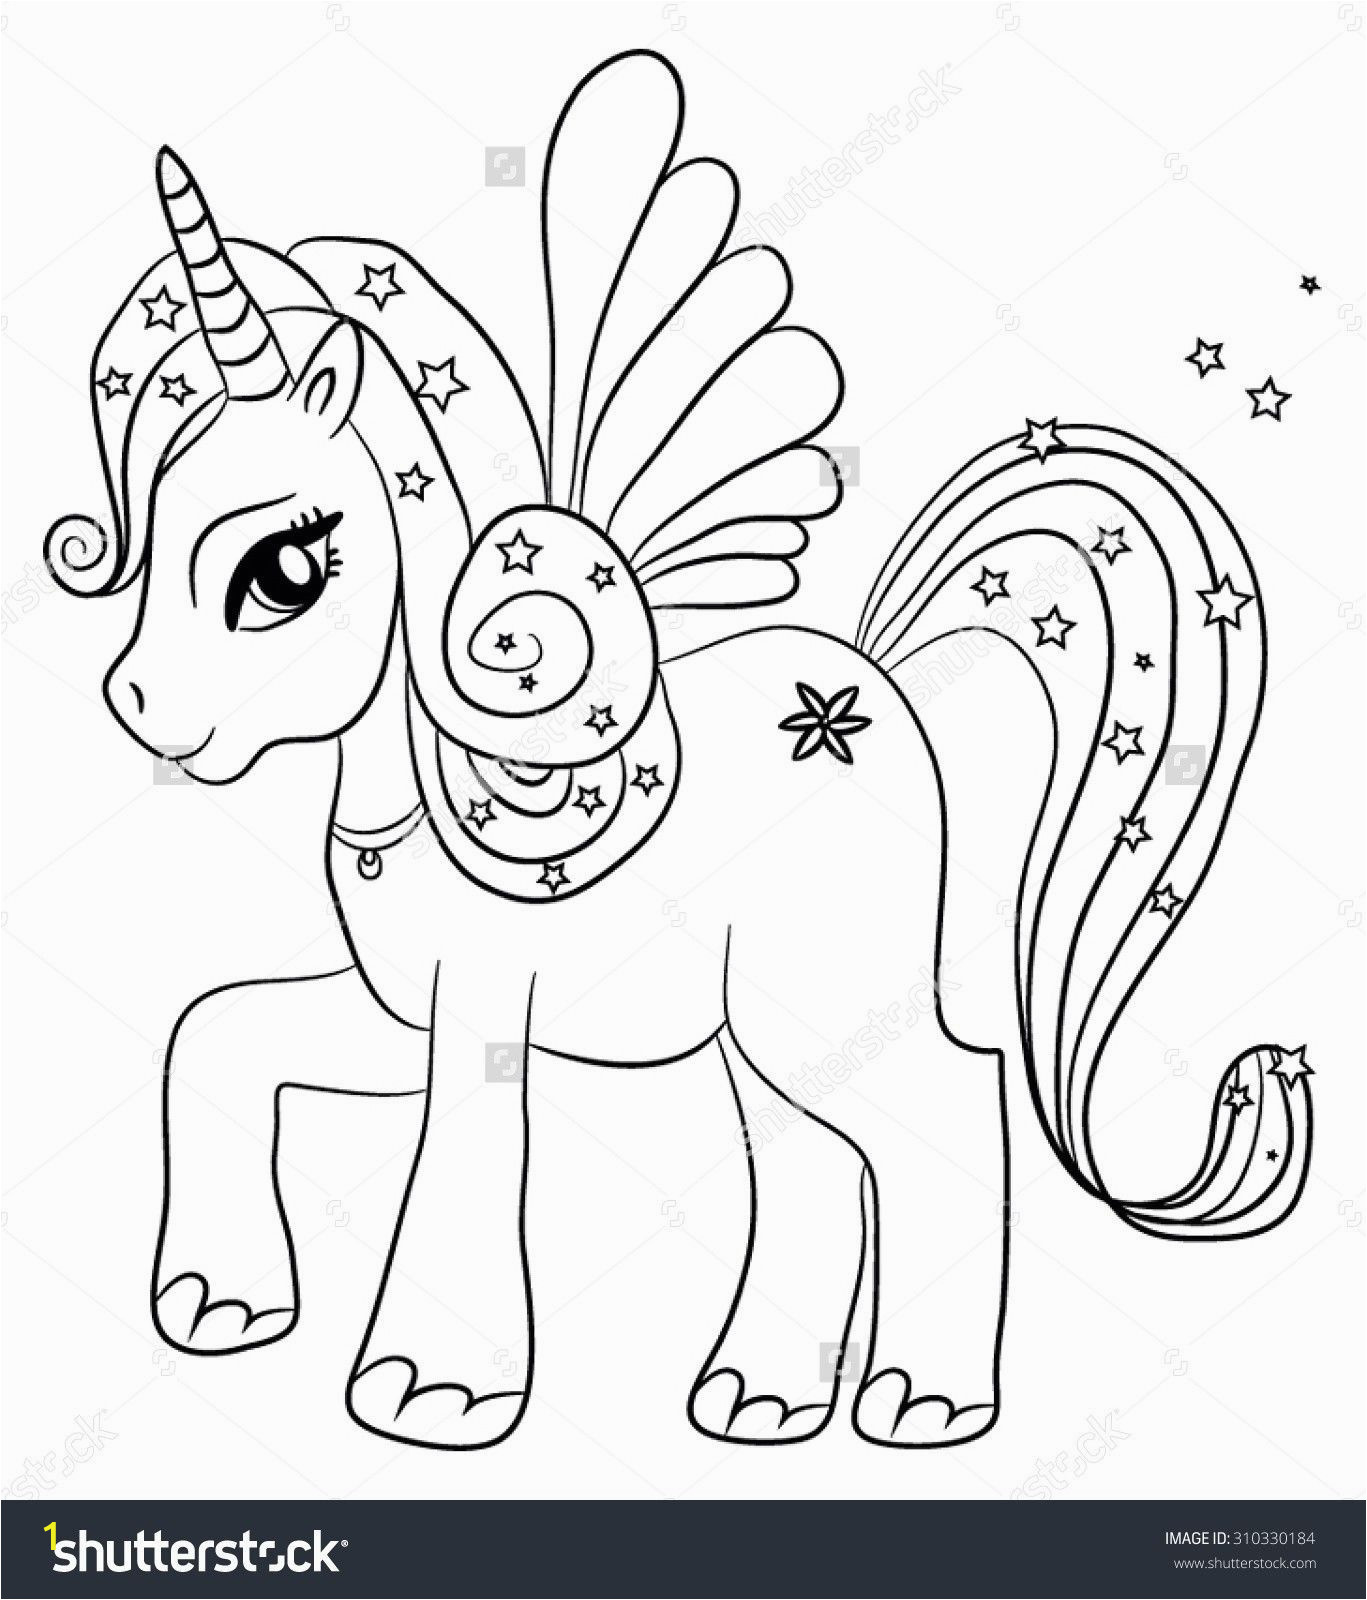 unicorns print saferbrowser image search results inkleur free unicorn coloring to pictures and color colour printable of printables sheets cute colouring sheet by number